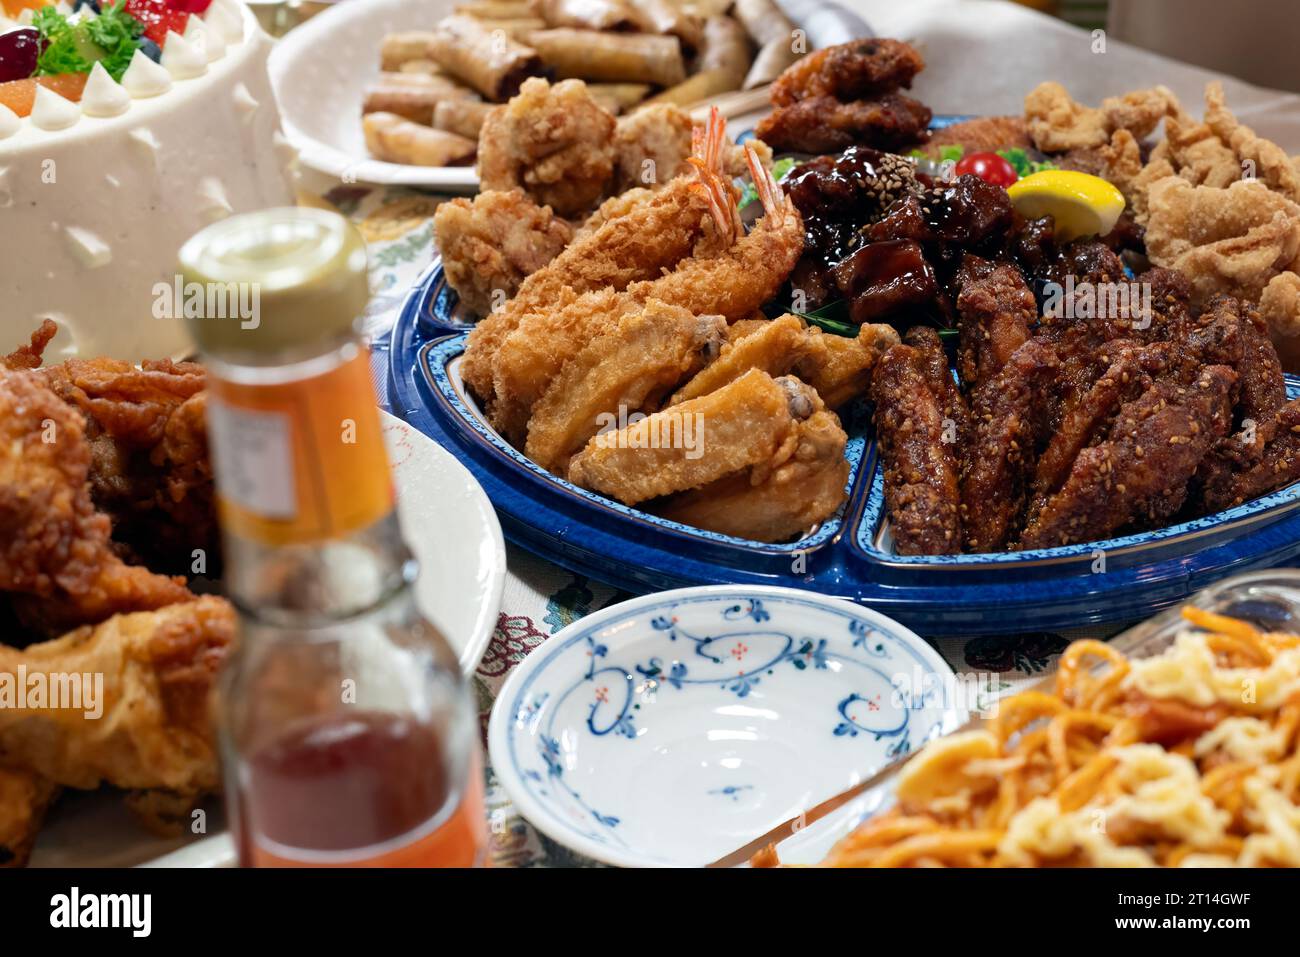 Party foods on the table with fried chicken, spaghetti, spring rolls and chilli sauce. Stock Photo